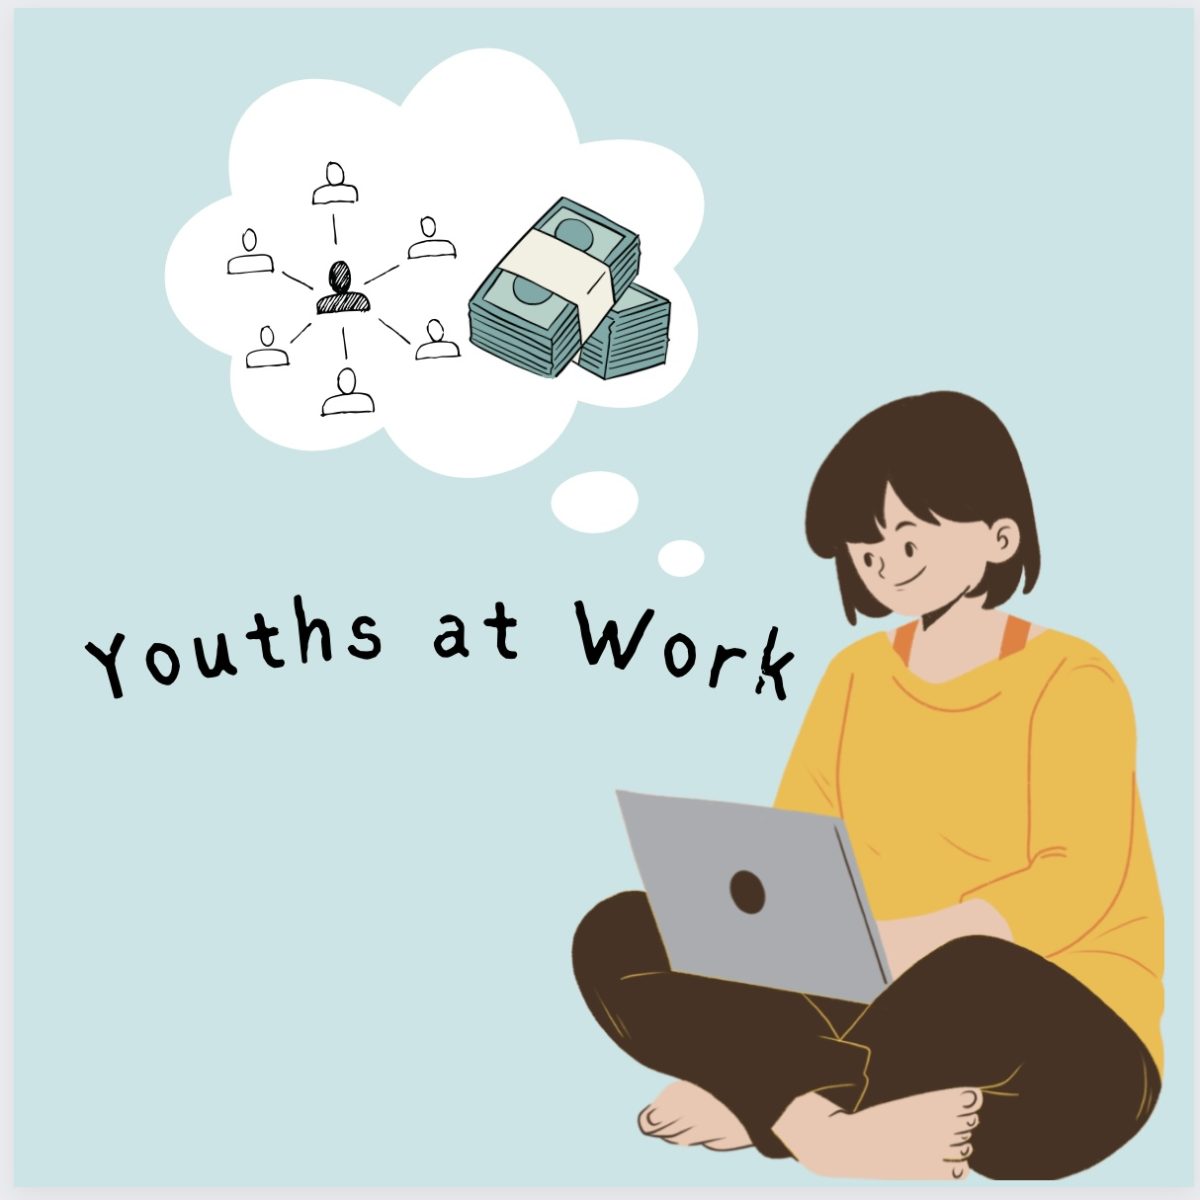 Youth at work